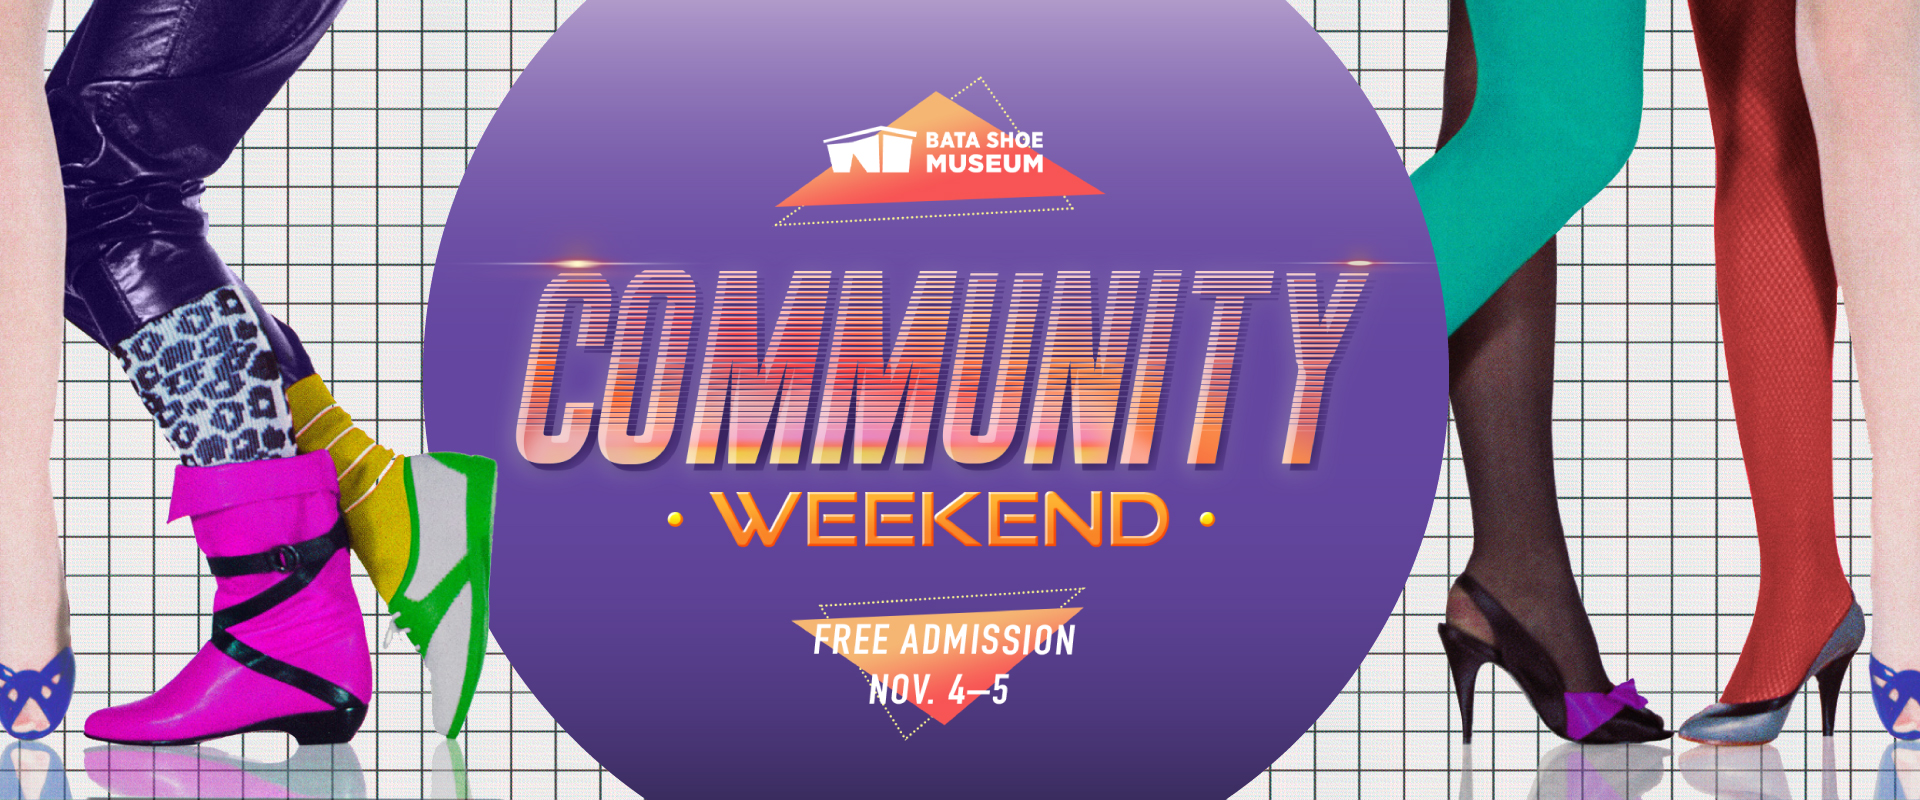 Visit us for free all weekend long! Nov. 4 to 5.